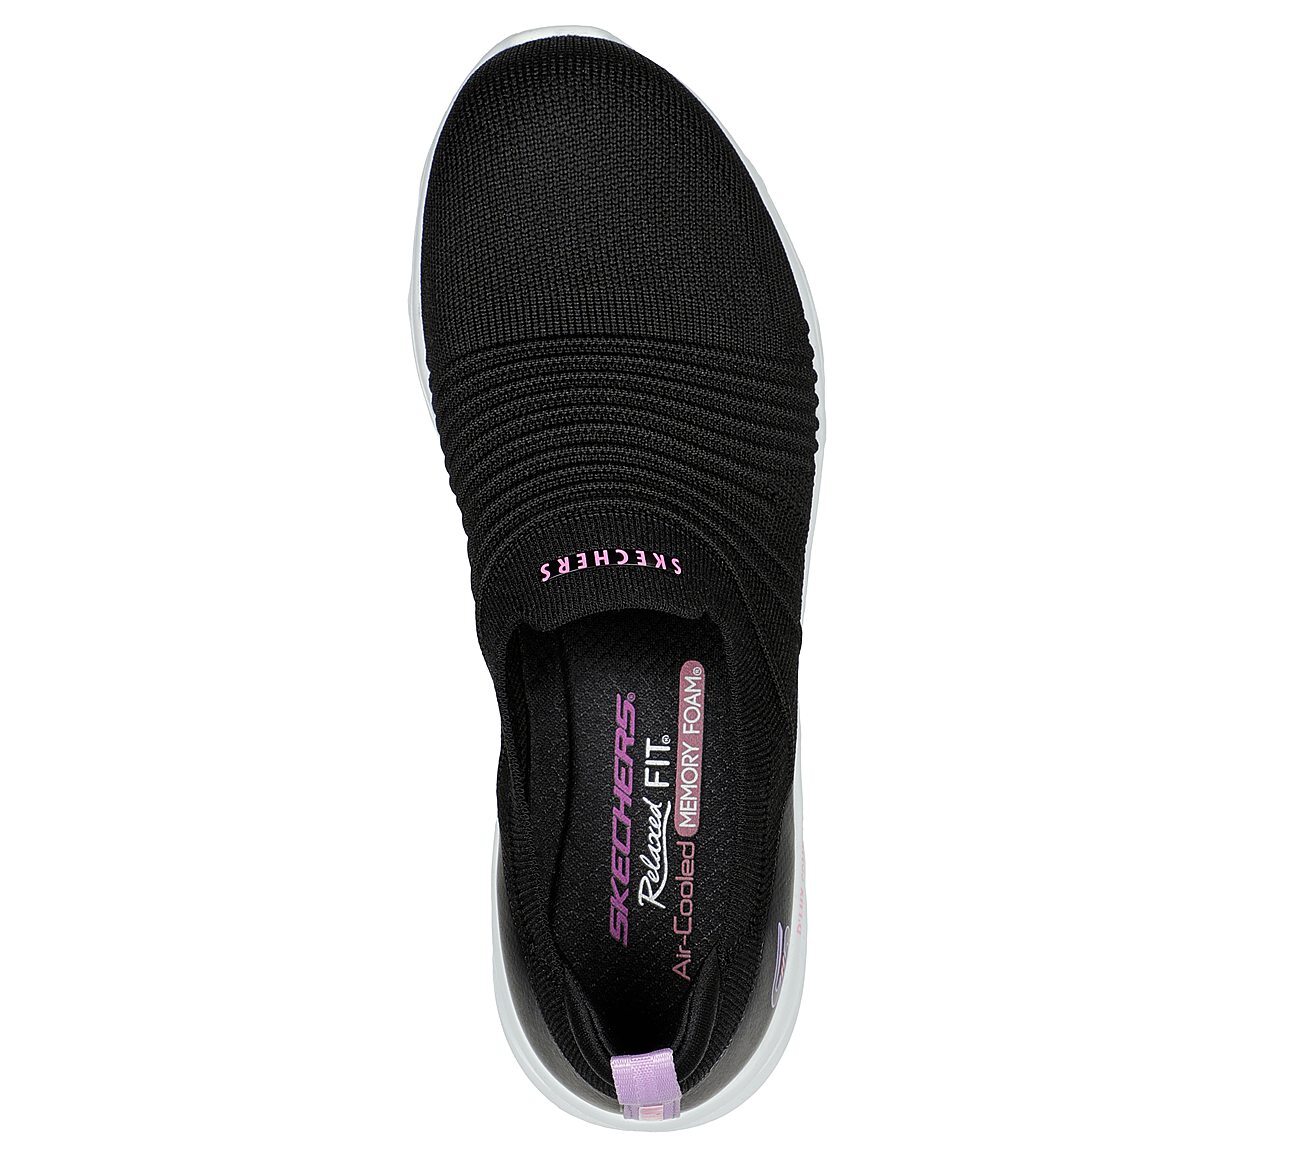 D'LUX COMFORT-GLOW TIME, BLACK/WHITE Footwear Top View